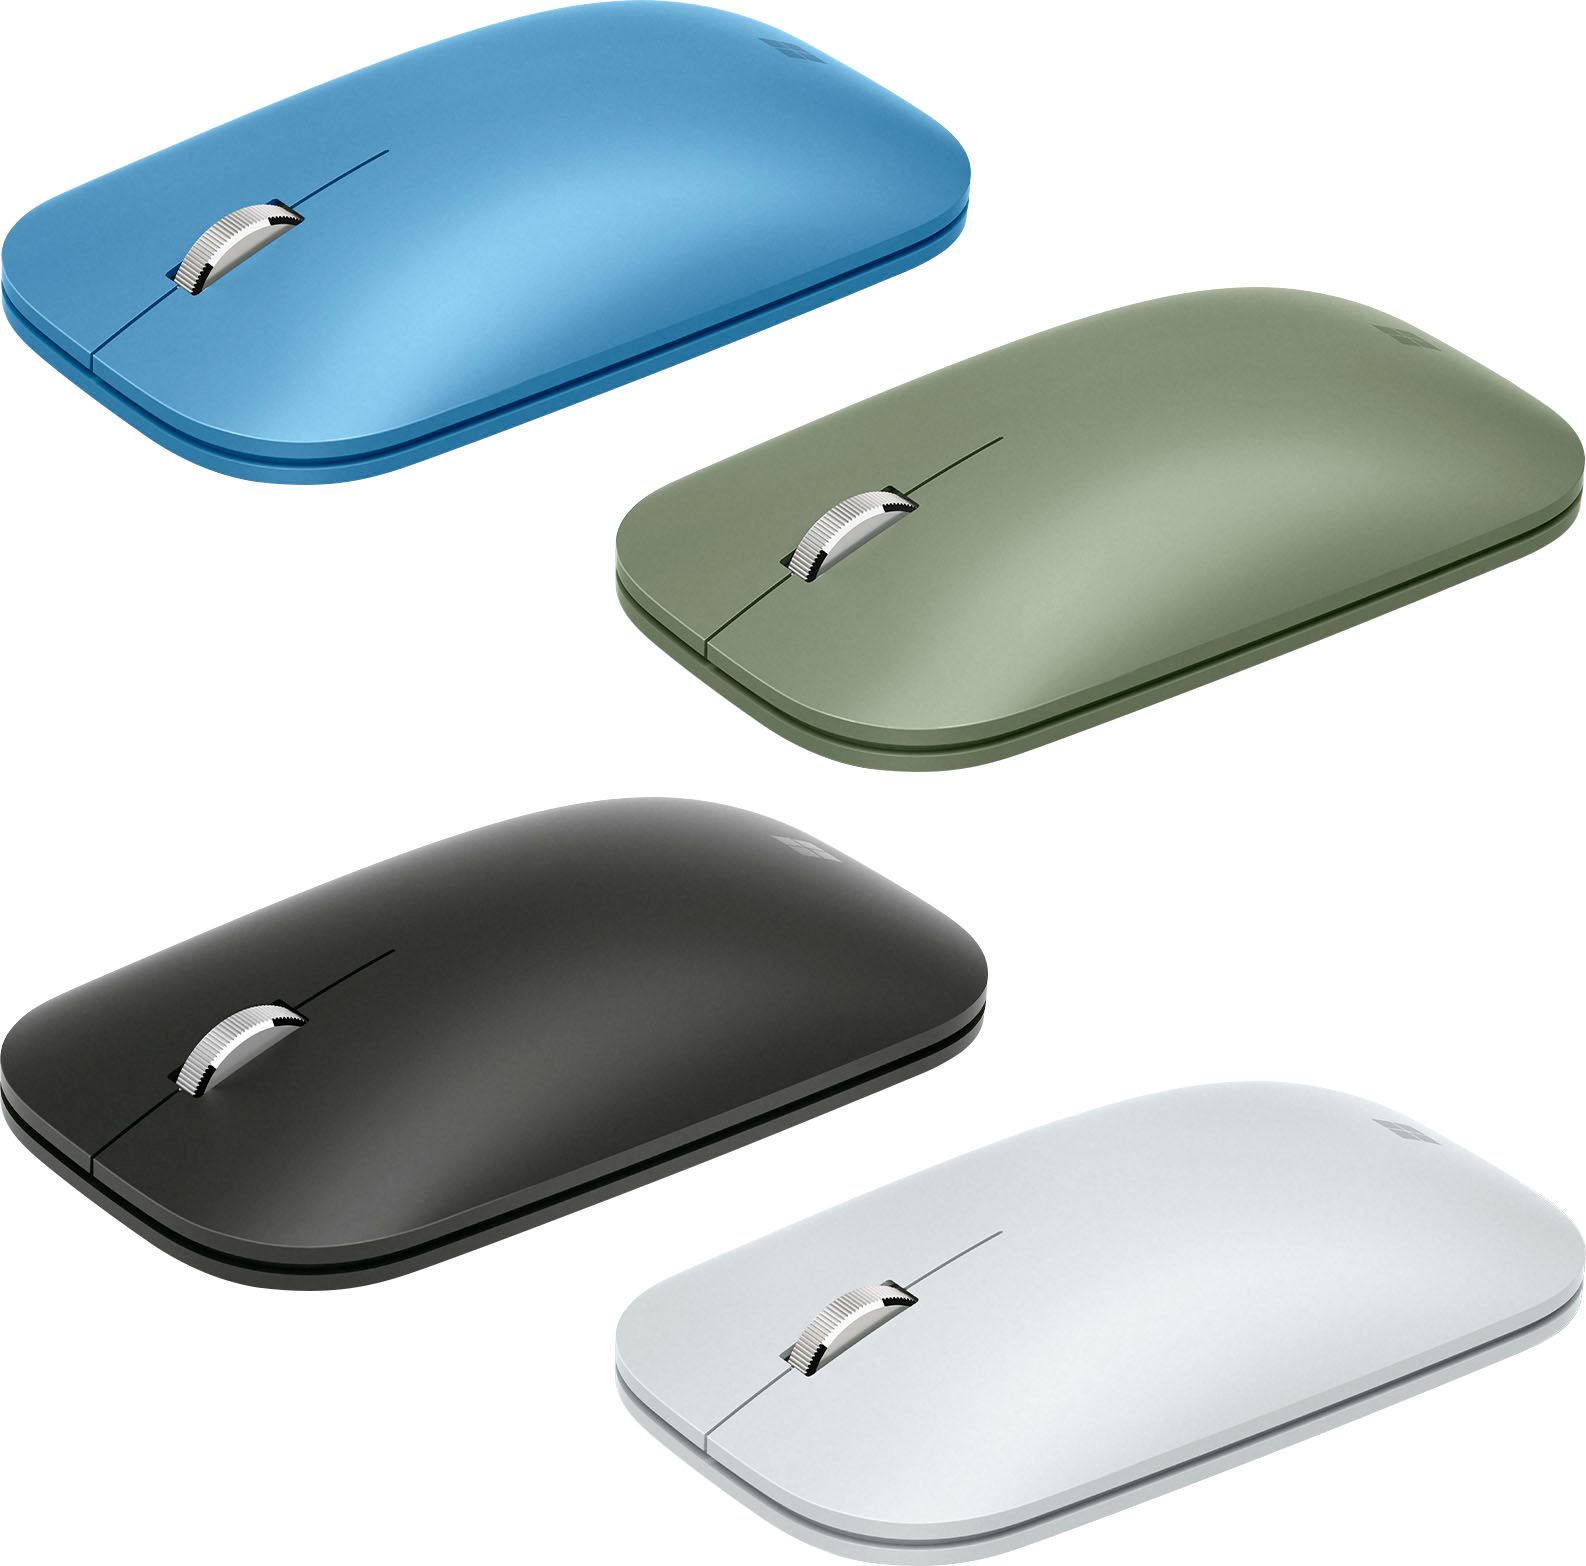 Microsoft Modern Mobile Mouse review